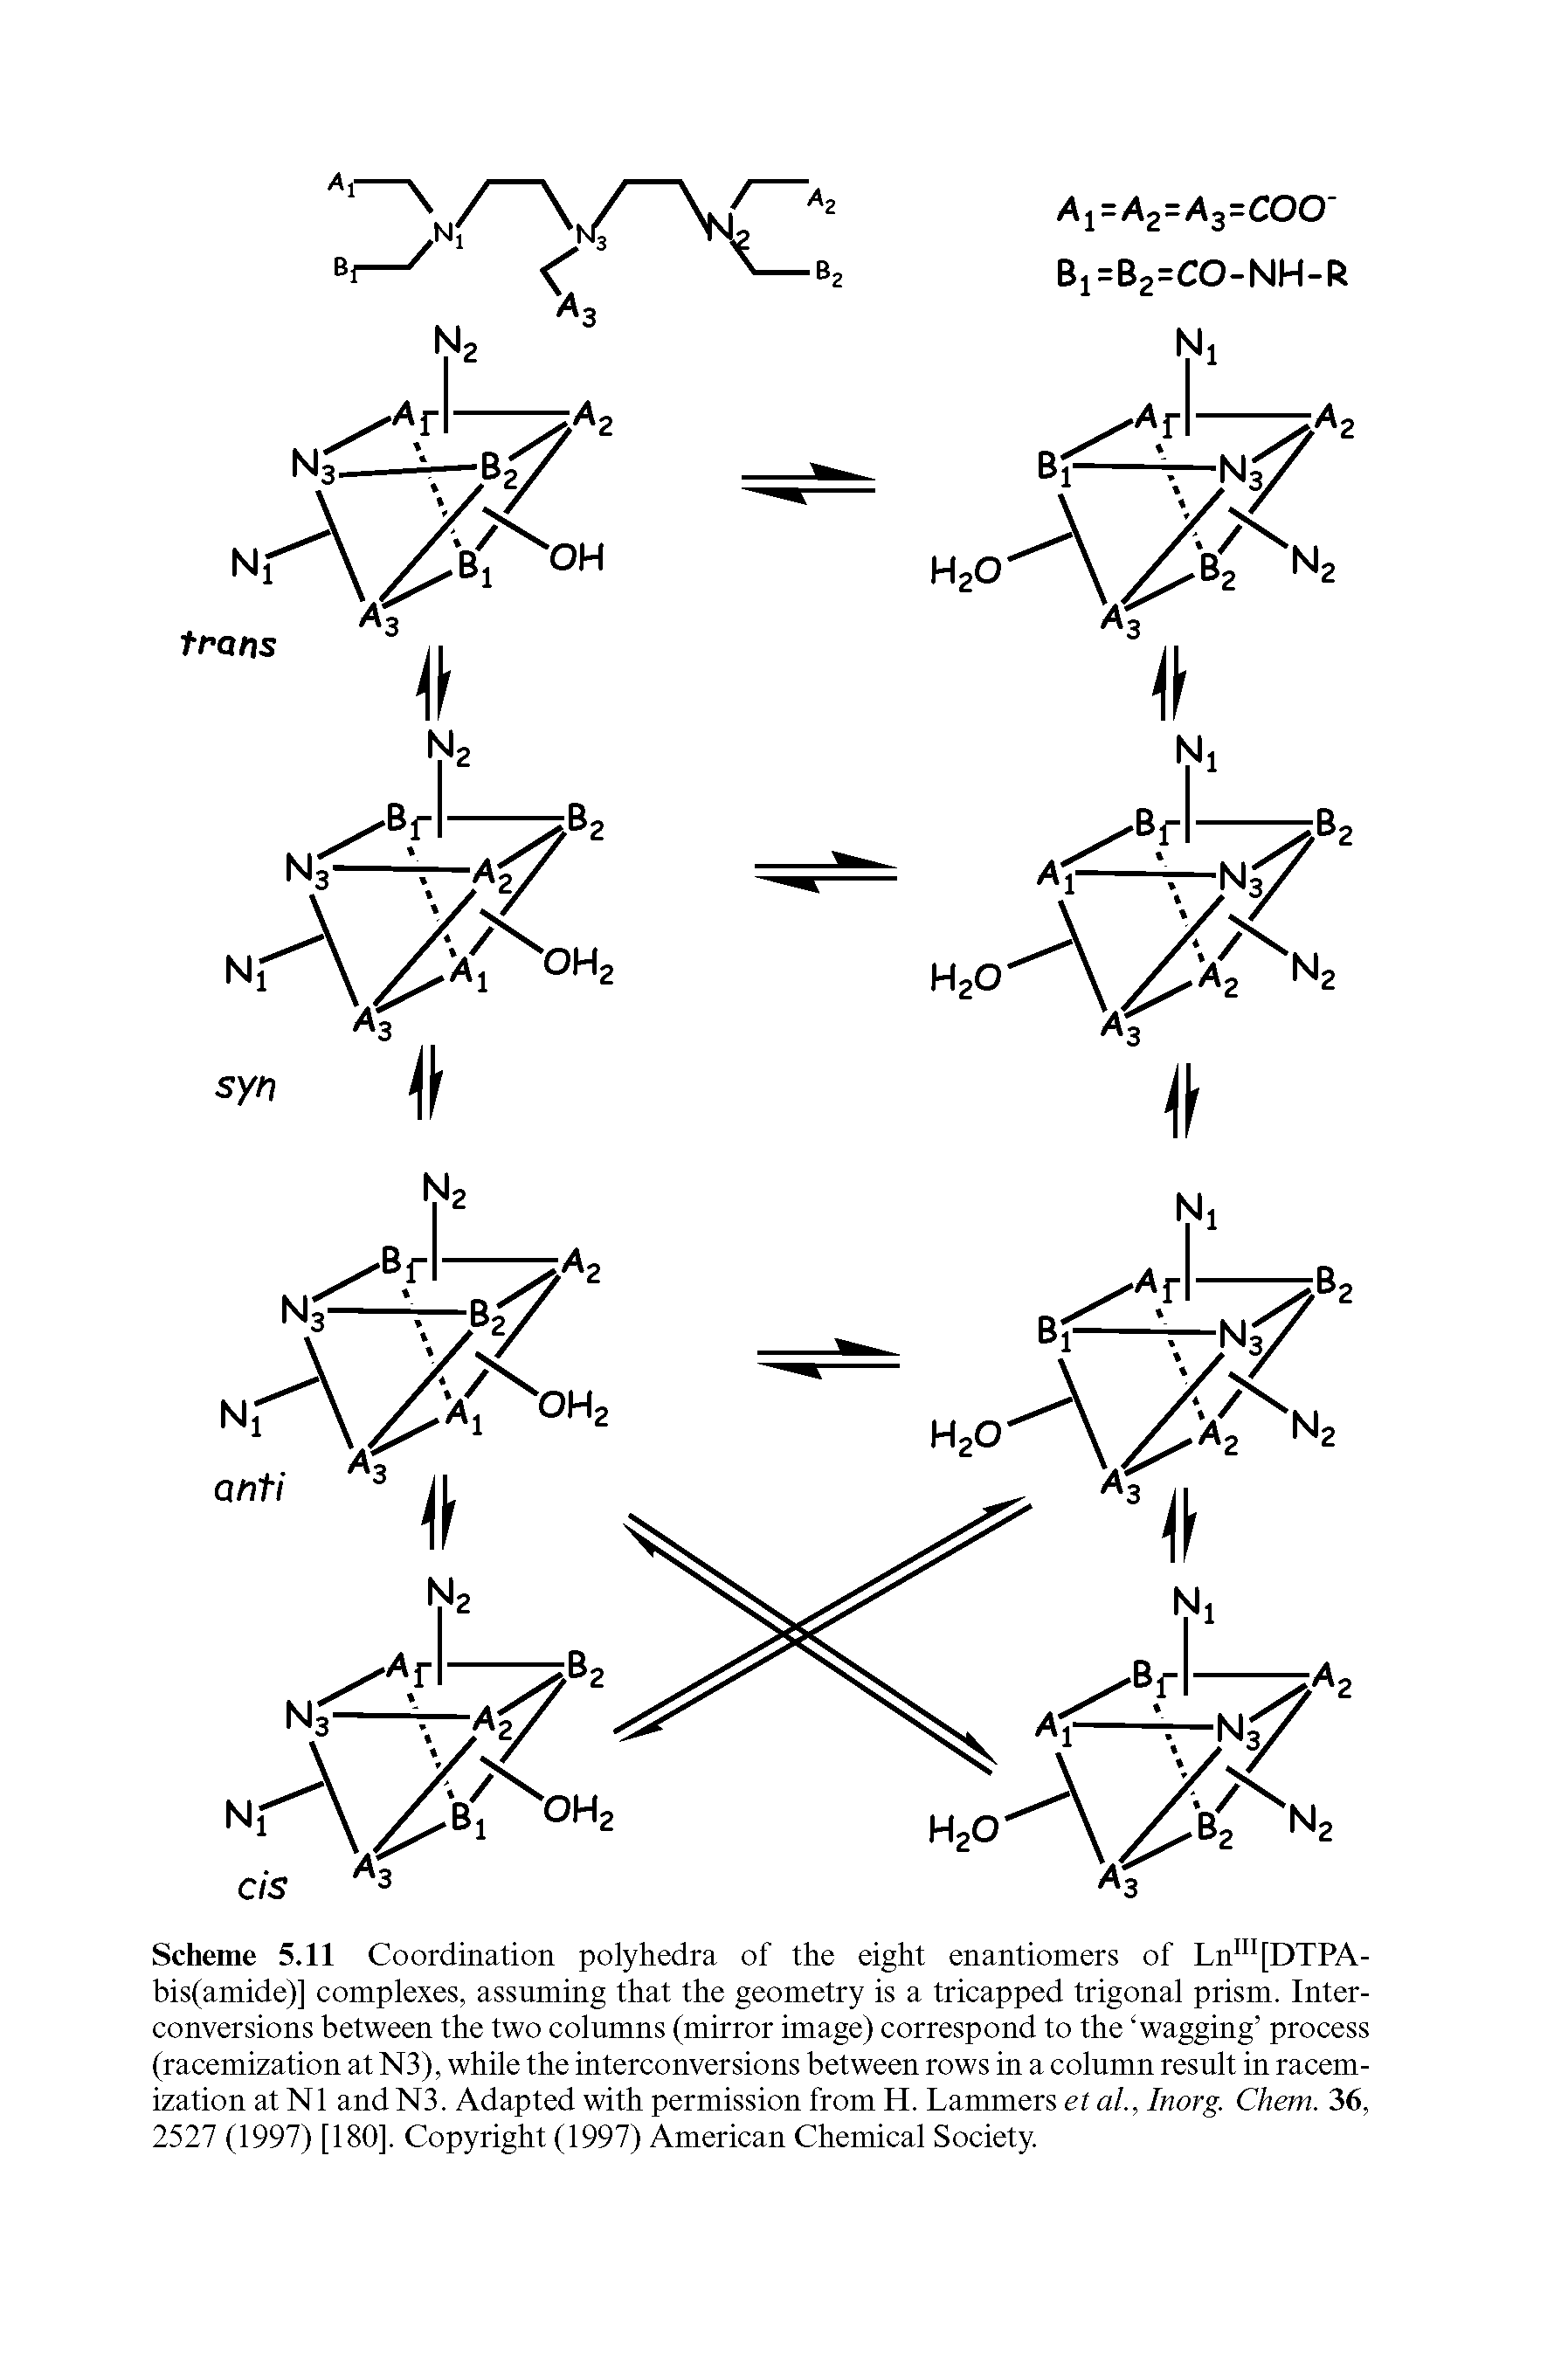 Scheme 5.11 Coordination polyhedra of the eight enantiomers of Ln [DTPA-bis(amide)] complexes, assuming that the geometry is a tricapped trigonal prism. Interconversions between the two columns (mirror image) correspond to the wagging process (racemization at N3), while the interconversions between rows in a column result in racem-ization at N1 and N3. Adapted with permission from H. hammers et al, Inorg. Chem. 36, 2527 (1997) [180]. Copyright (1997) American Chemical Society.